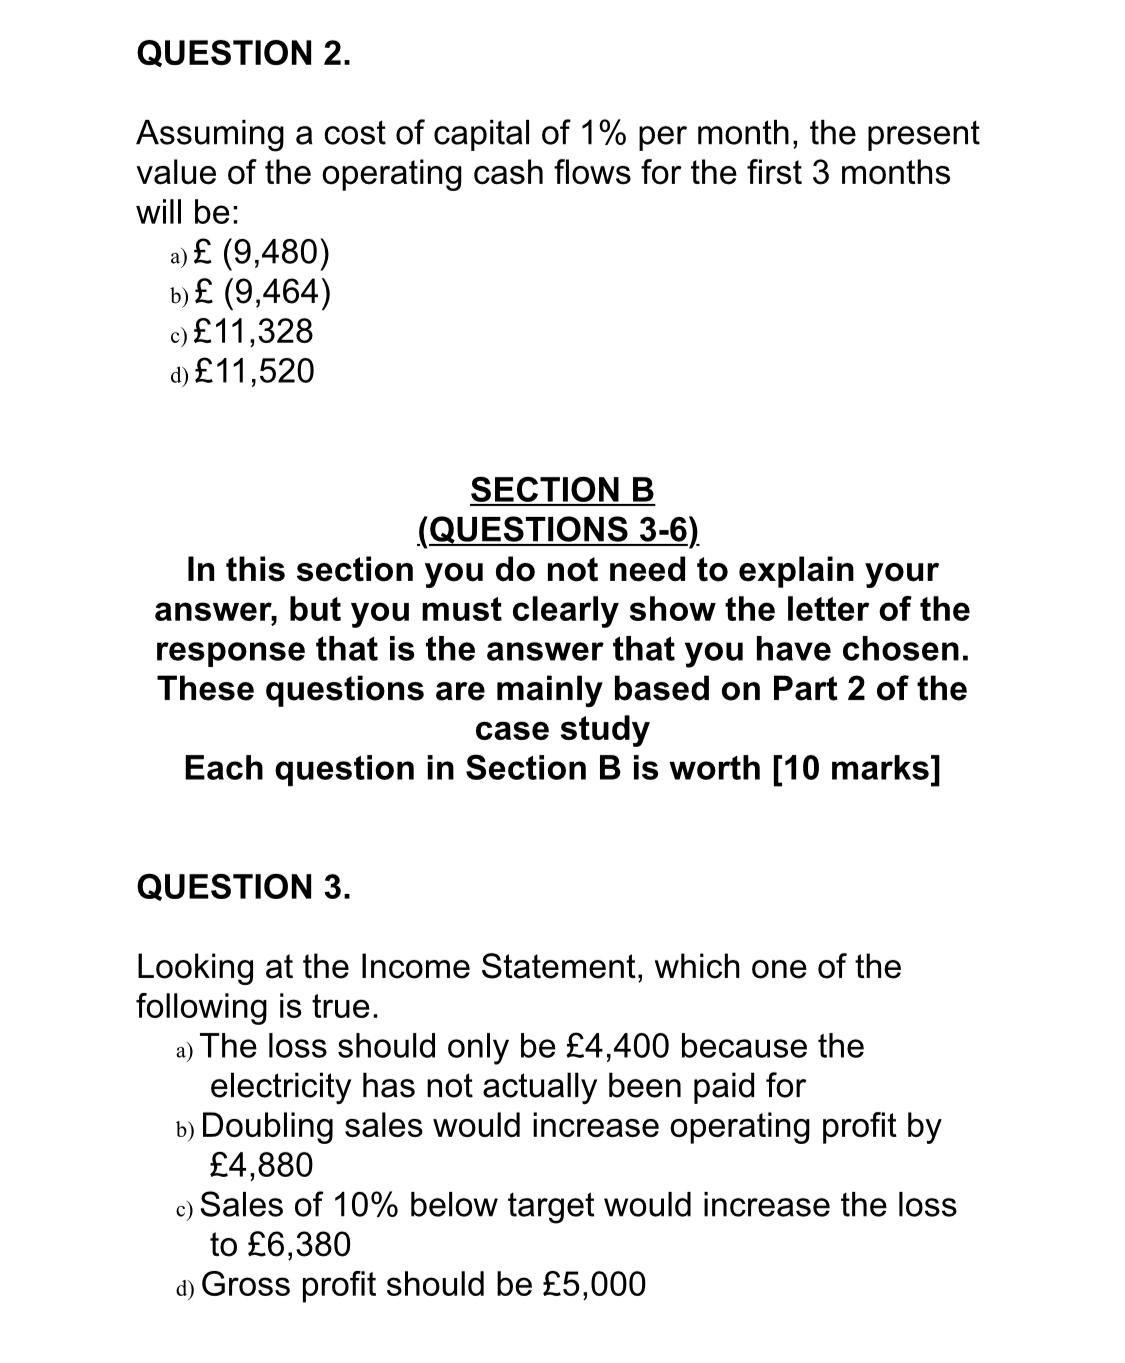 QUESTION 2. Assuming a cost of capital of 1% per month, the present value of the operating cash flows for the first 3 months